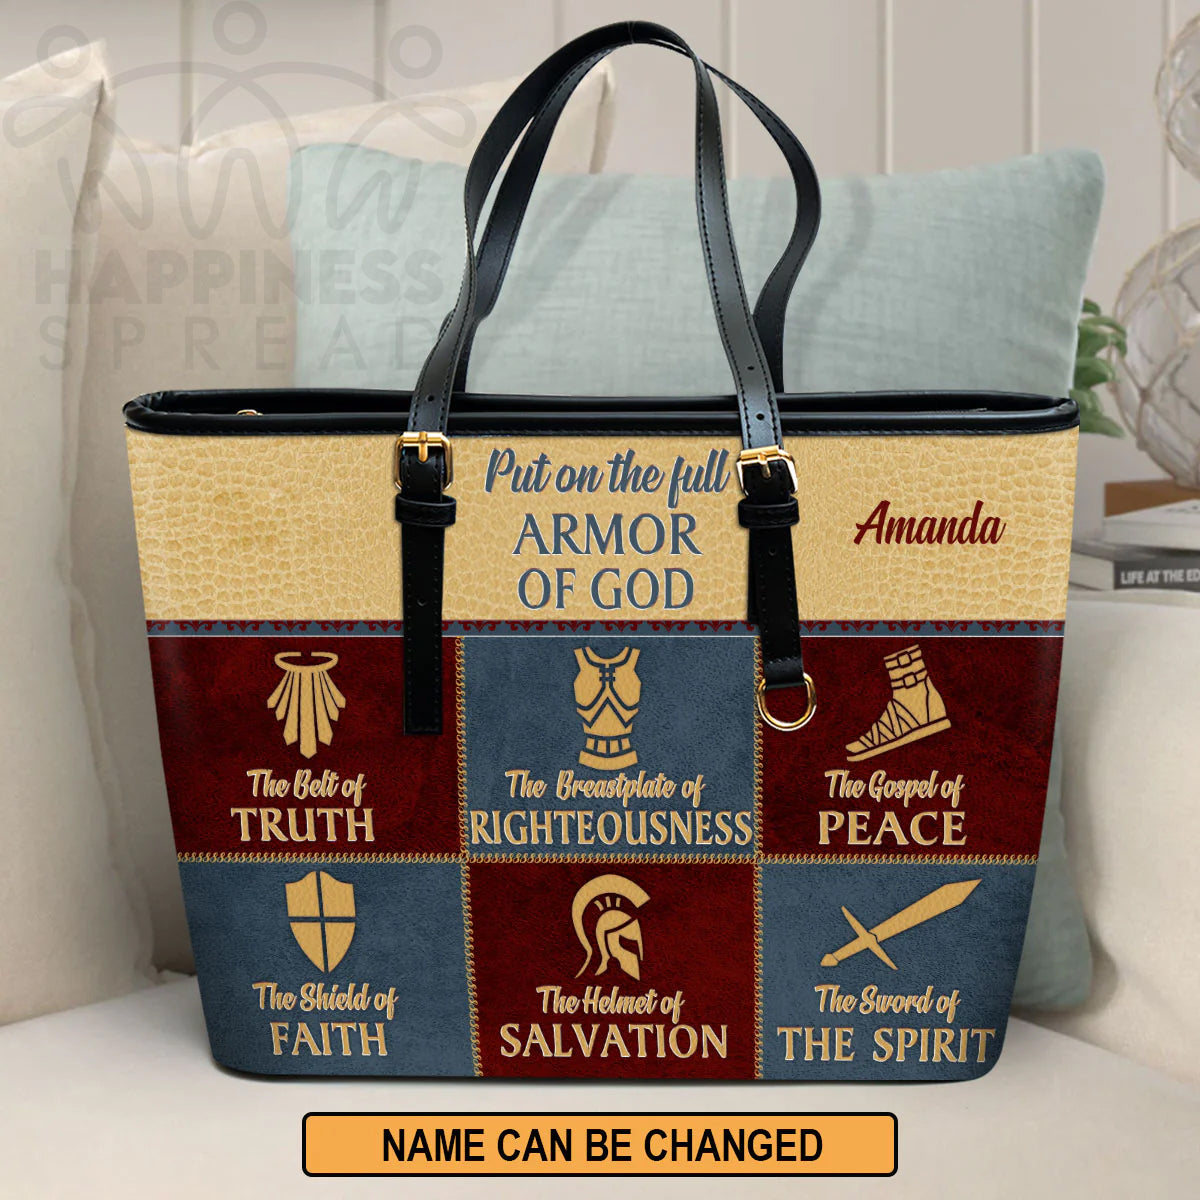 Christianart Handbag, Personalized Hand Bag, The Gospel Of Peace, Personalized Gifts, Gifts for Women. - Christian Art Bag